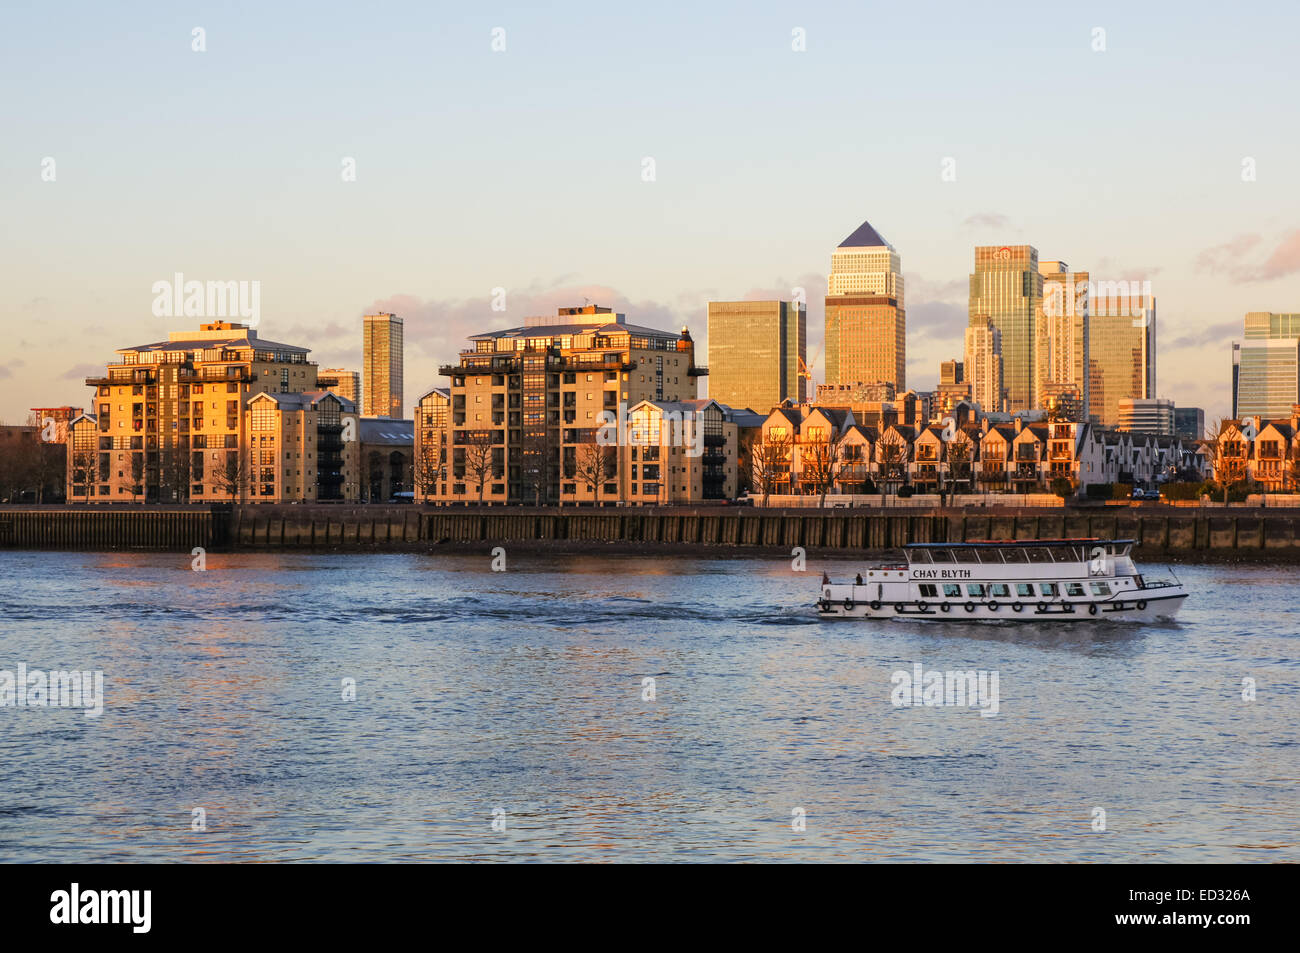 Residential building buildings at Canary Wharf, South London England United Kingdom UK Stock Photo